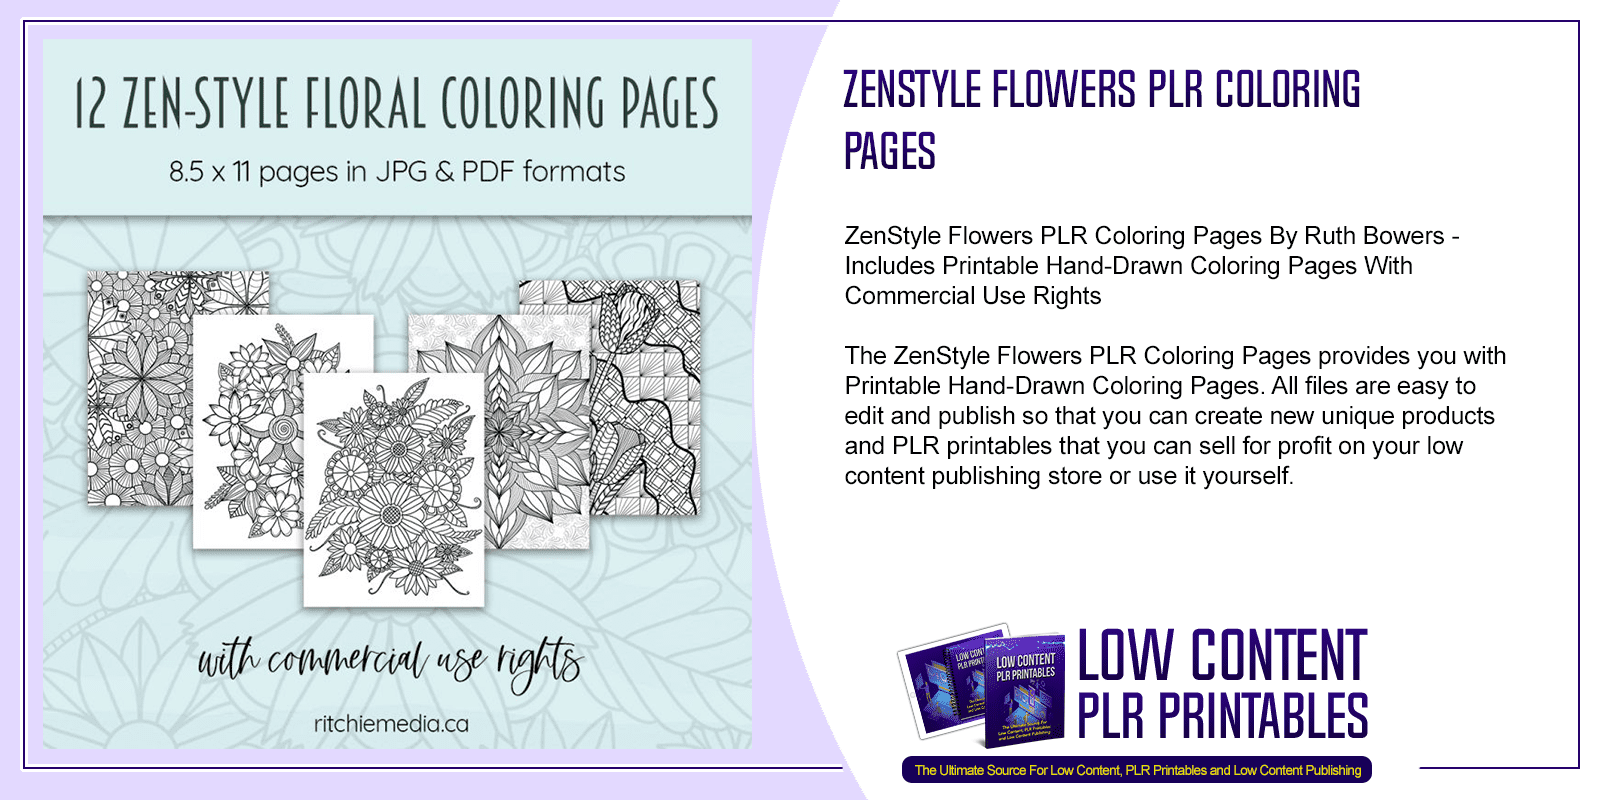 ZenStyle Flowers PLR Coloring Pages